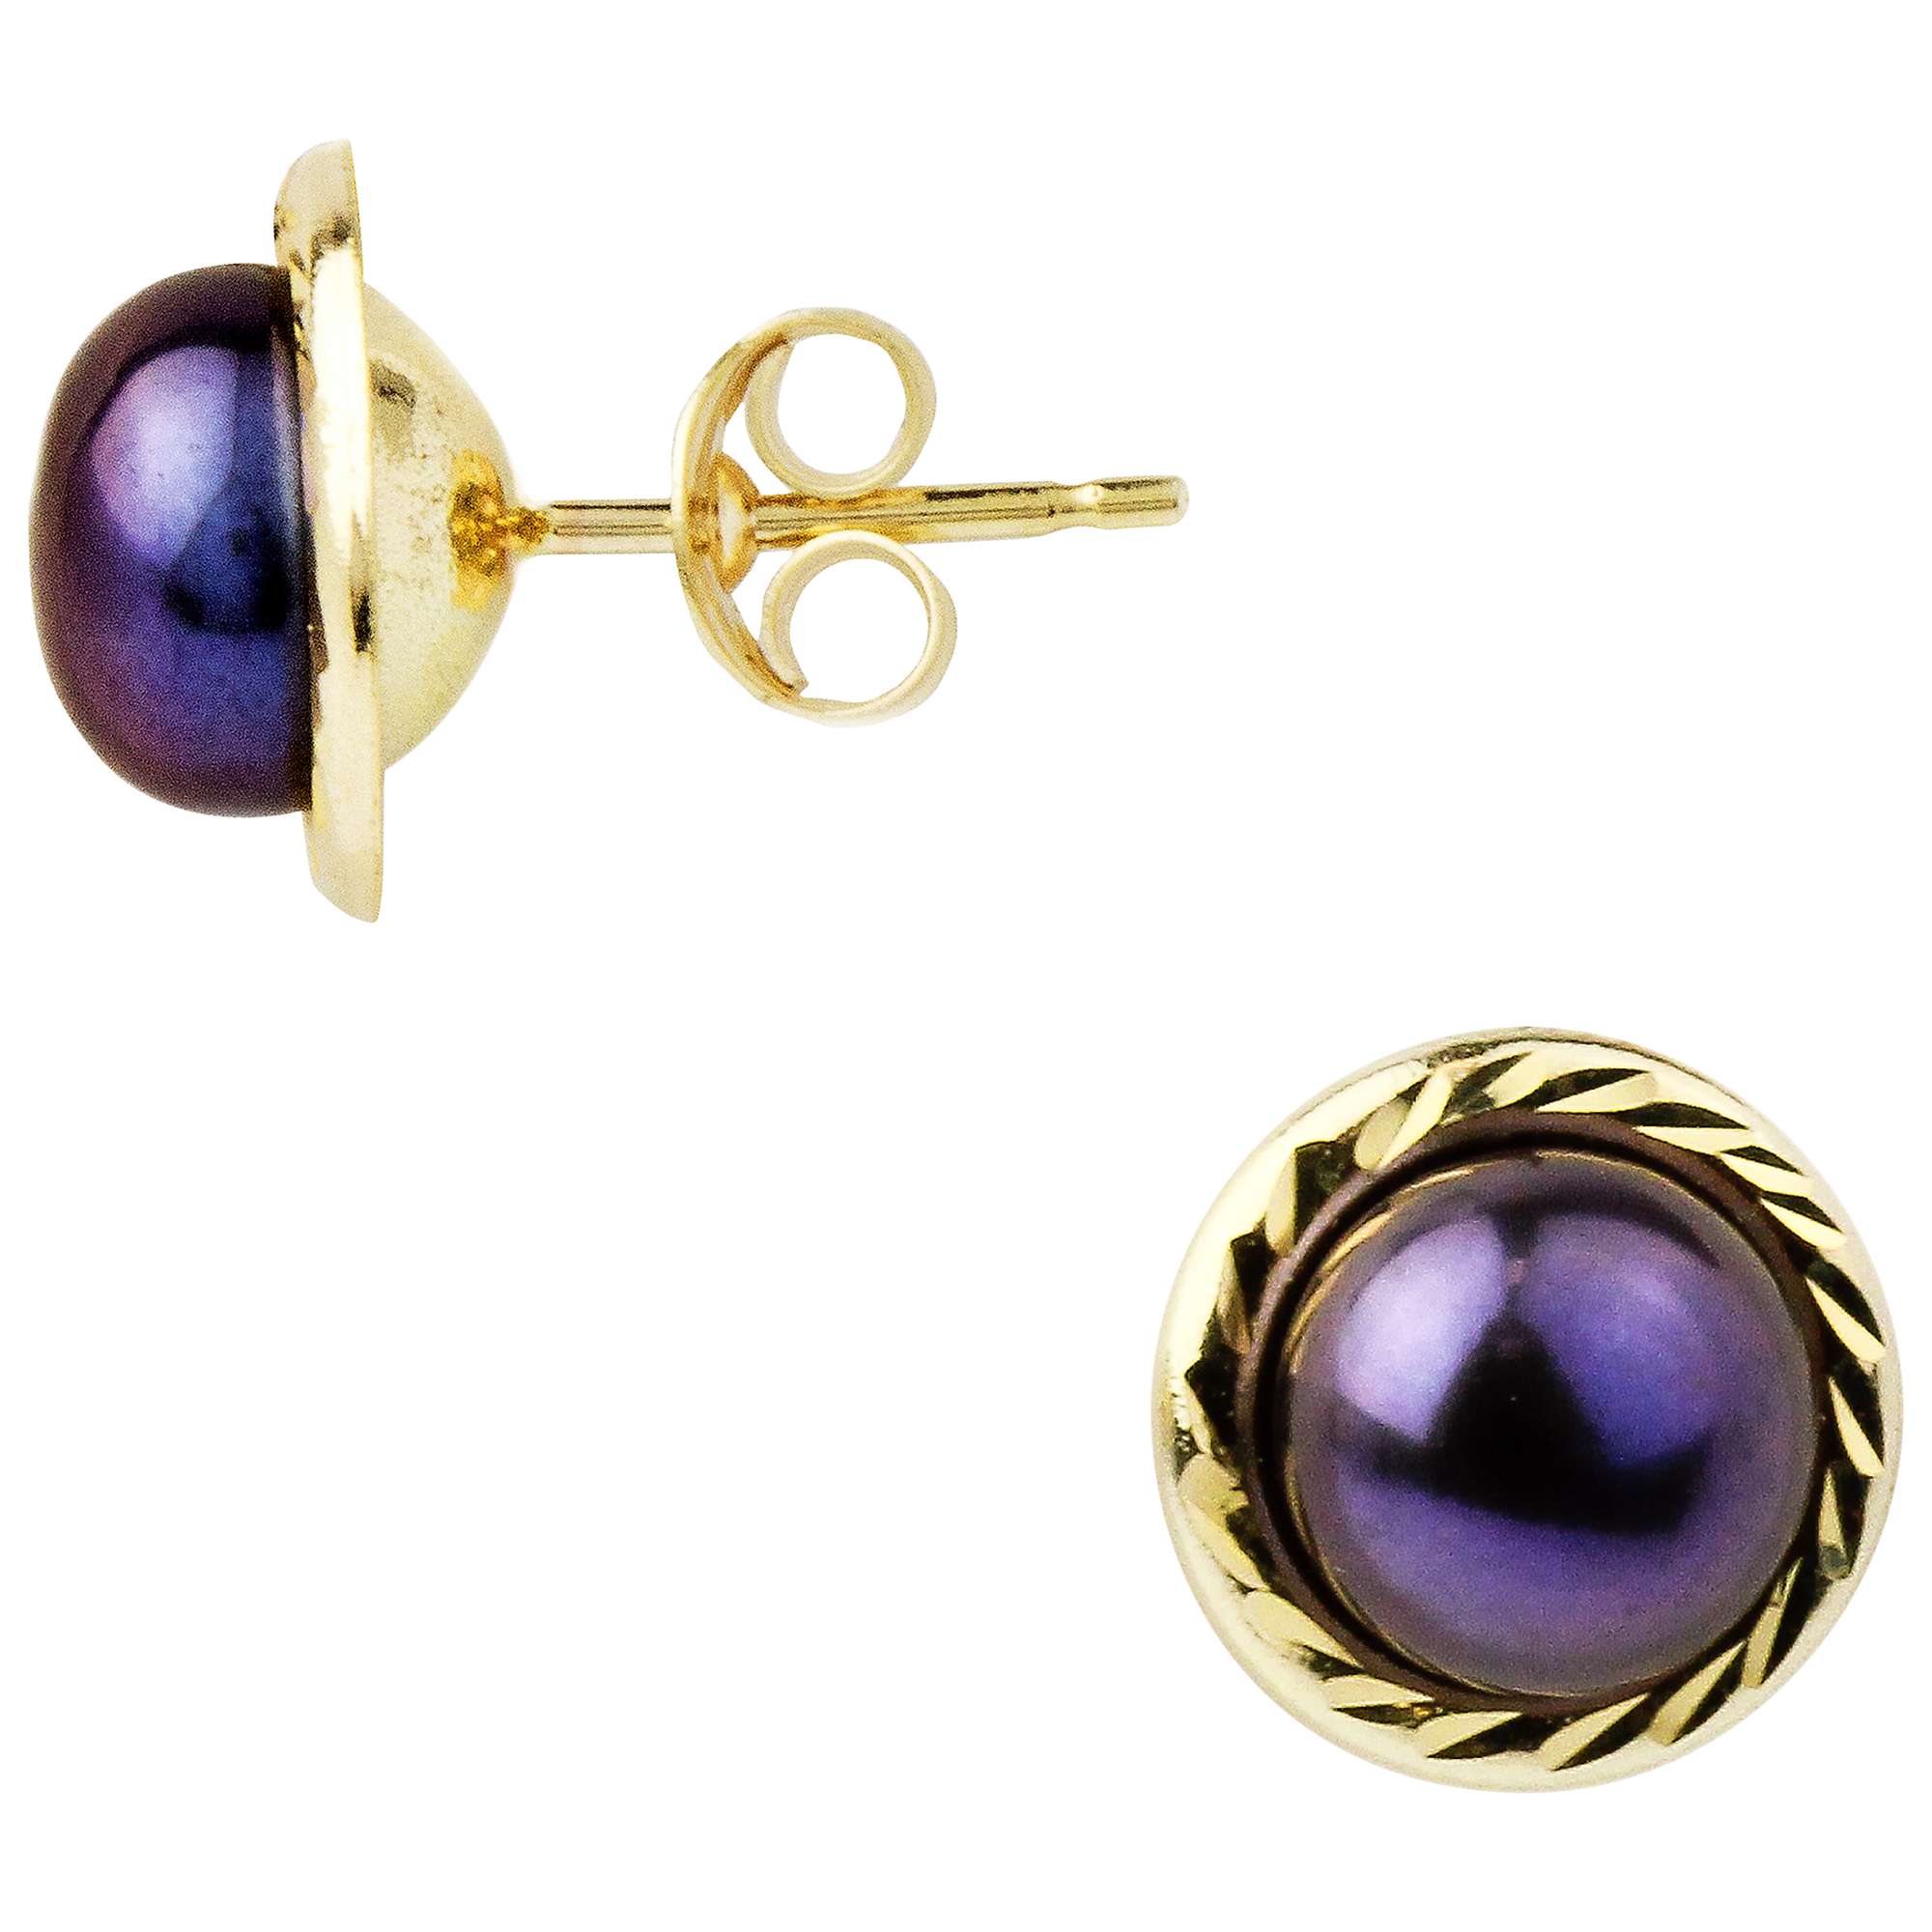 Buy A B Davis 9ct Yellow Gold Border Freshwater Pearl Stud Earrings Online at johnlewis.com